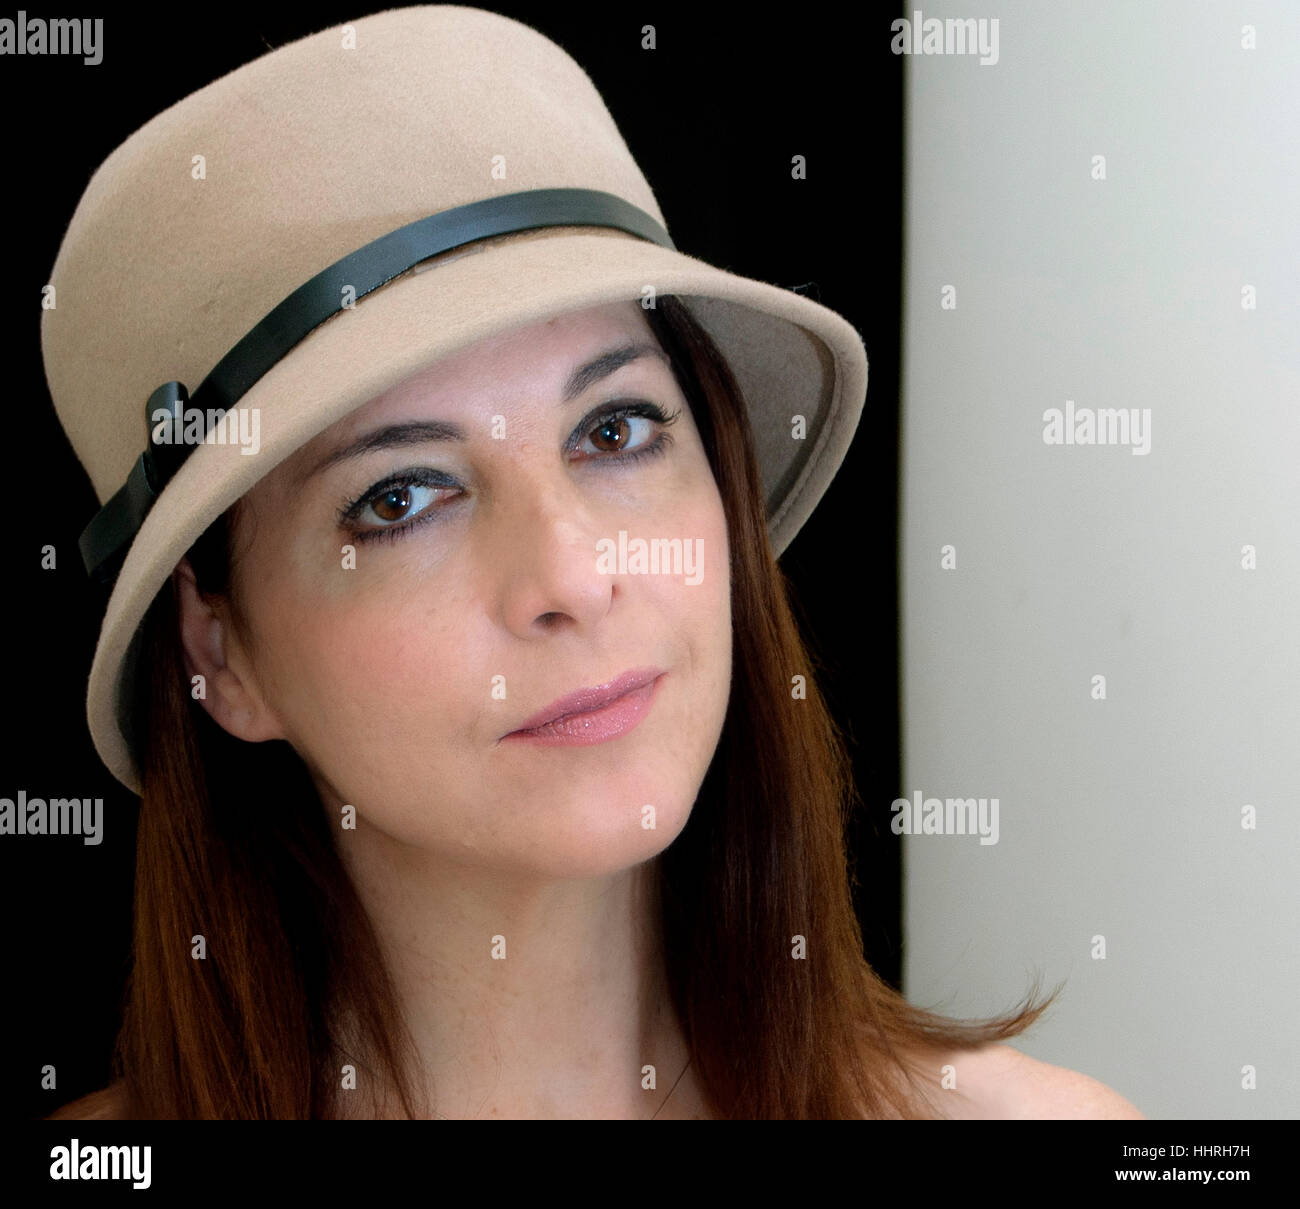 Portrait of a woman wearing hat, looking at camera. Banque D'Images